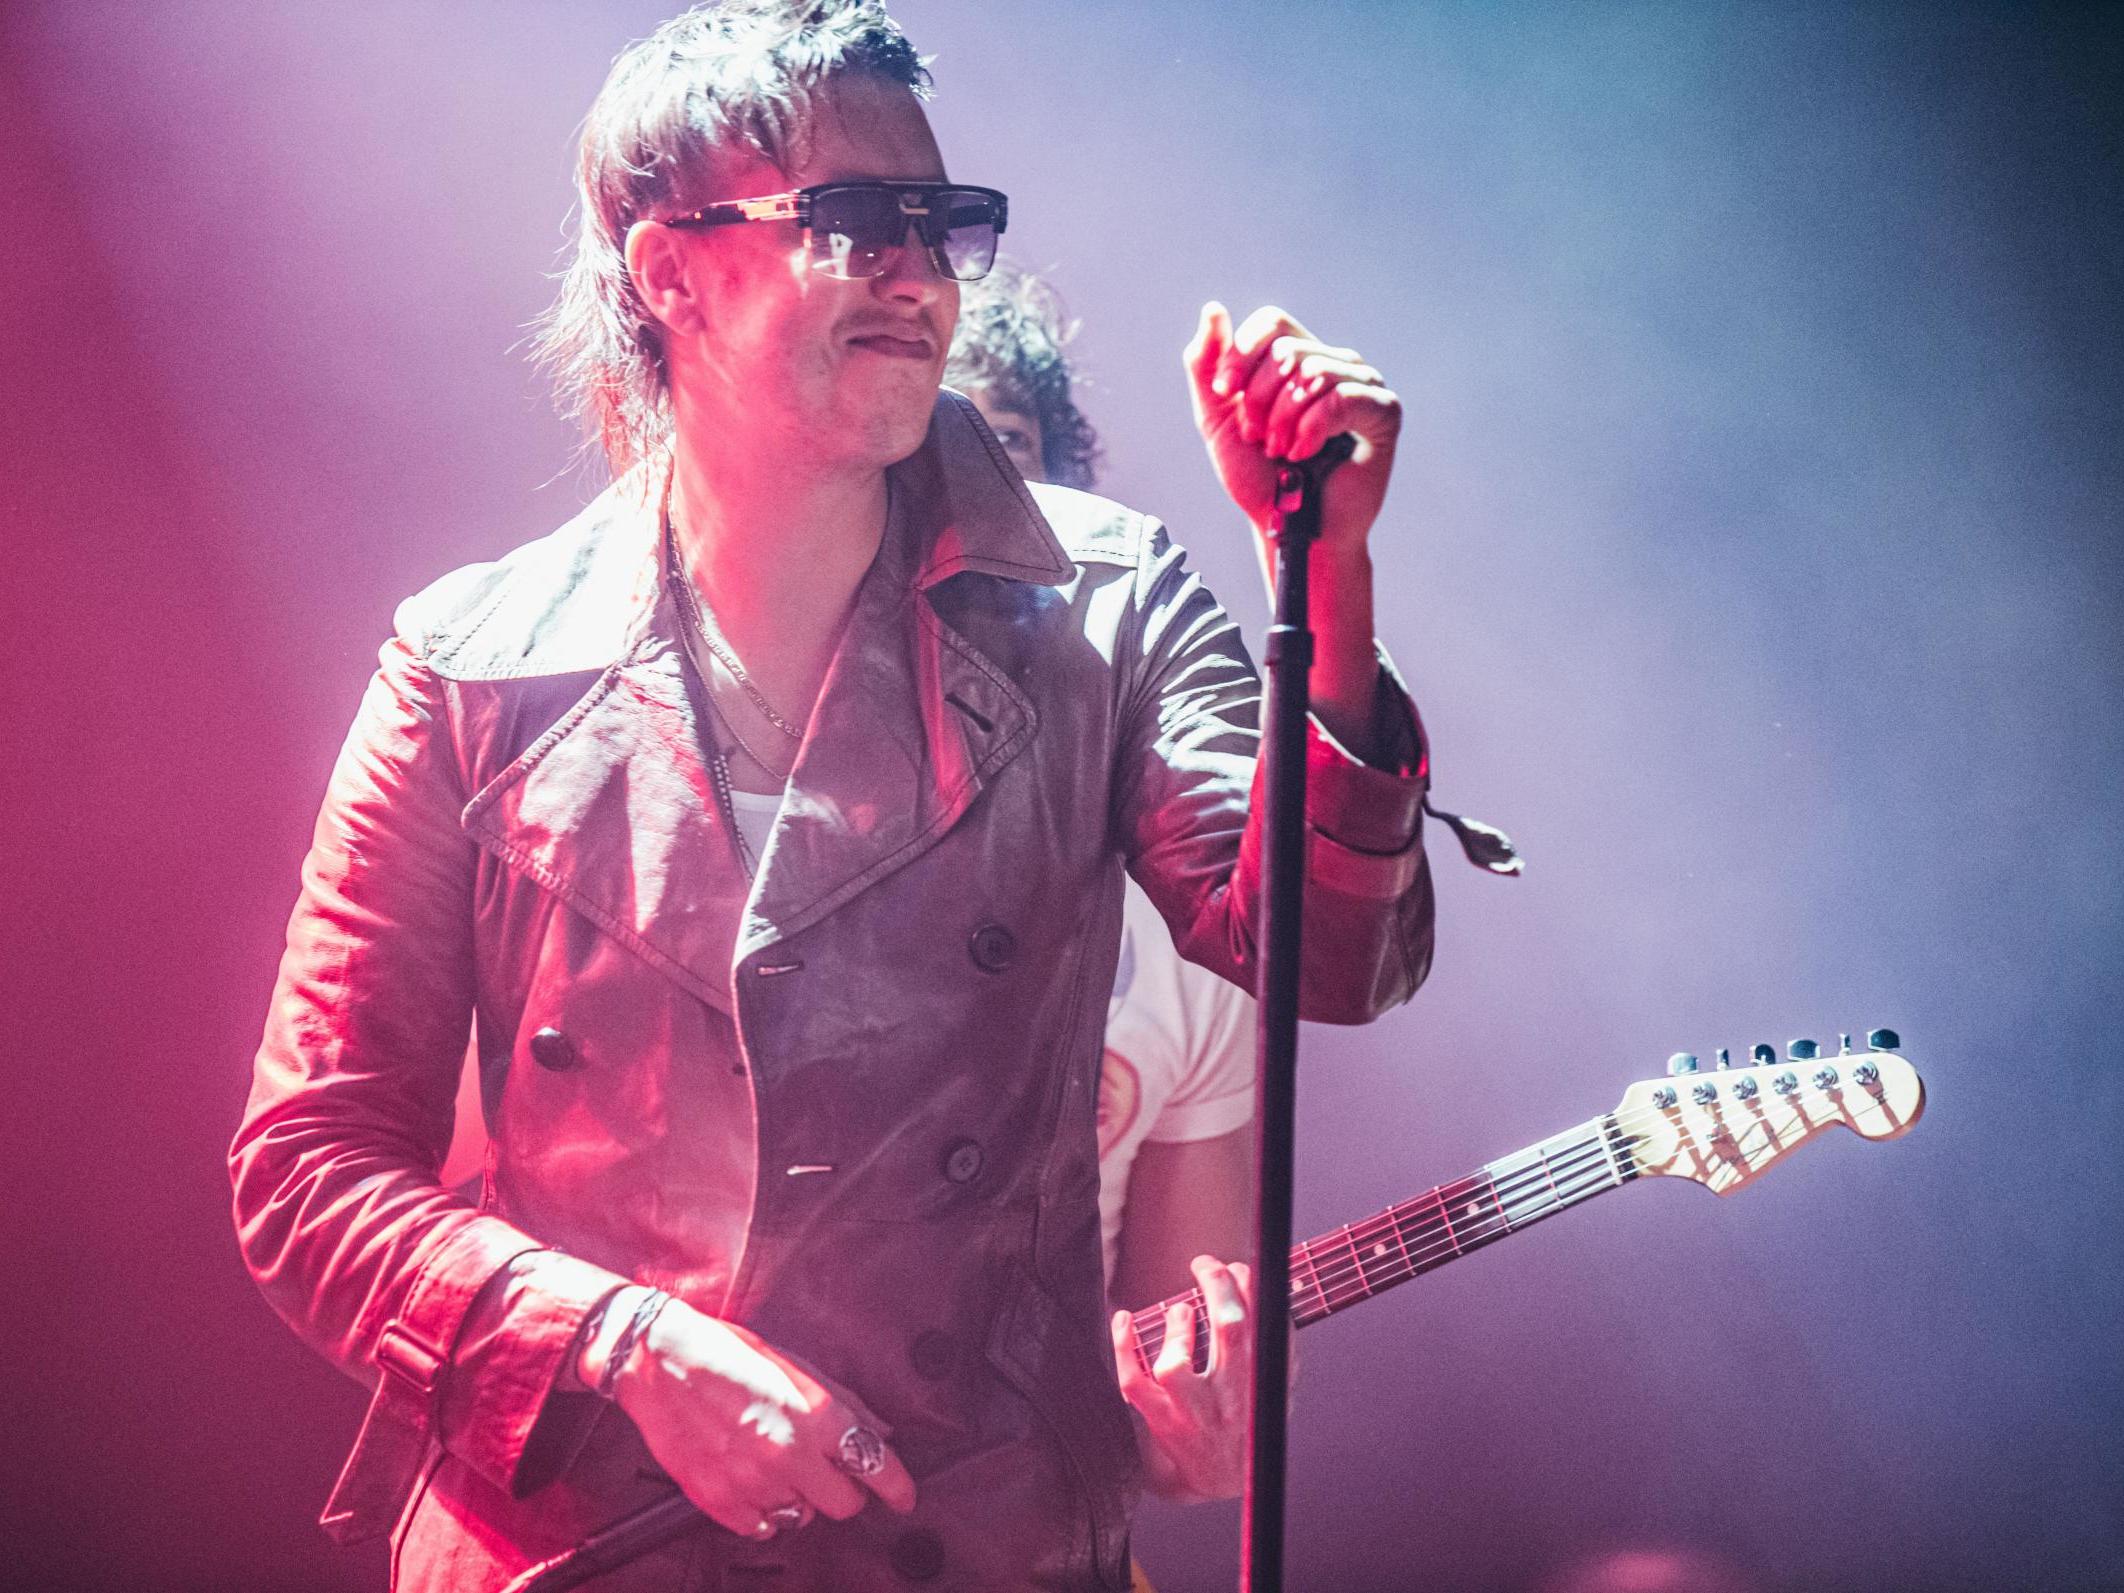 Julian Casablancas at The Roundhouse, London, 19 February 2020